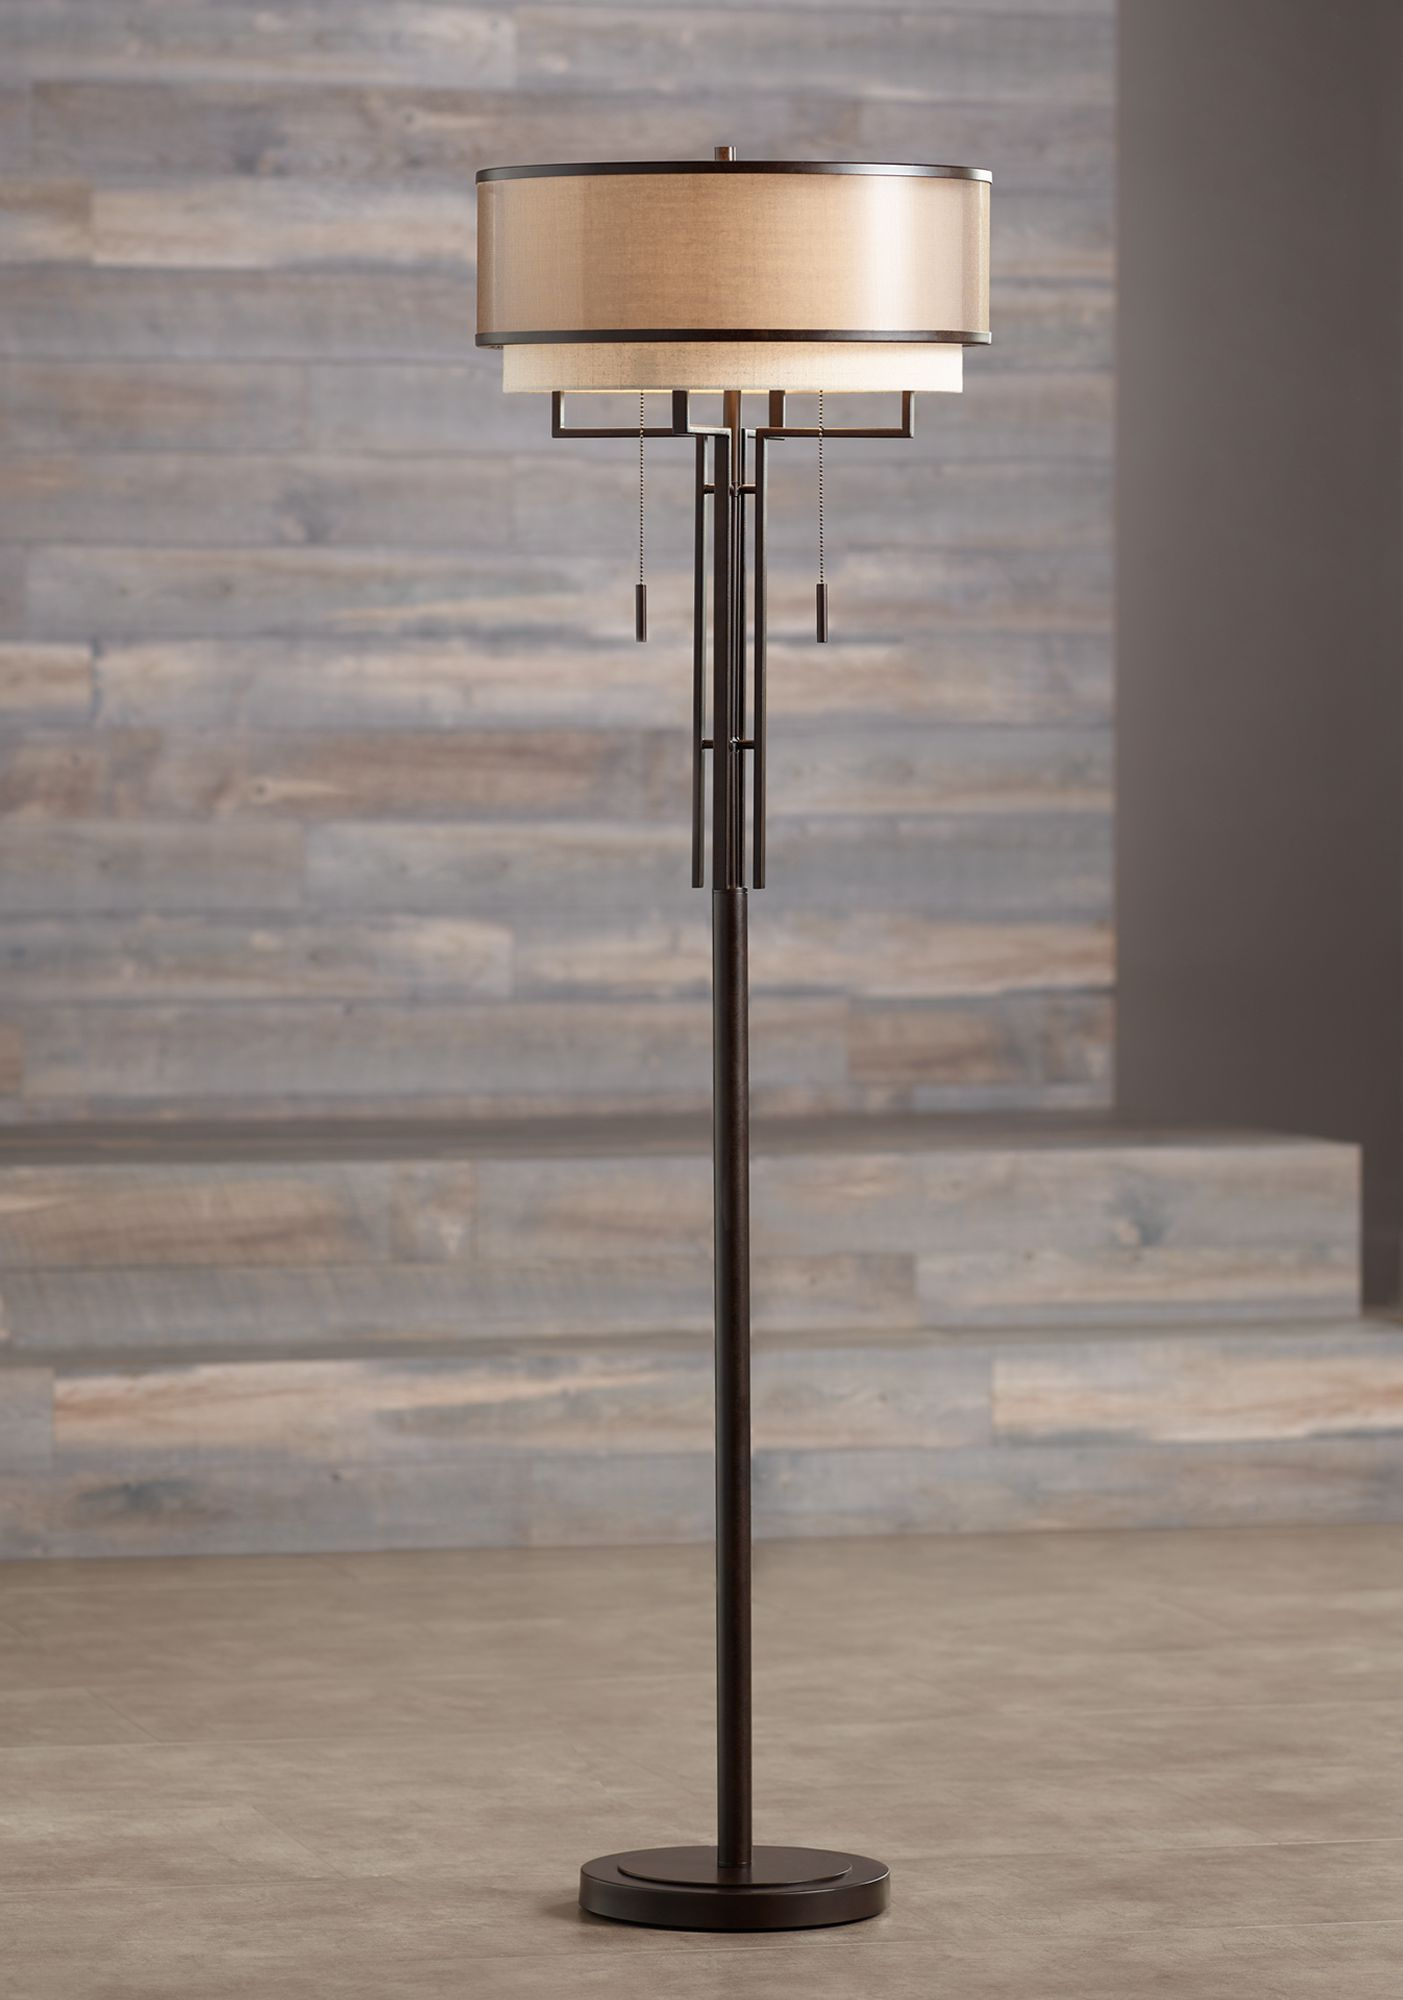 Franklin Iron Works Modern Floor Lamp Industrial Bronze intended for size 1403 X 2000